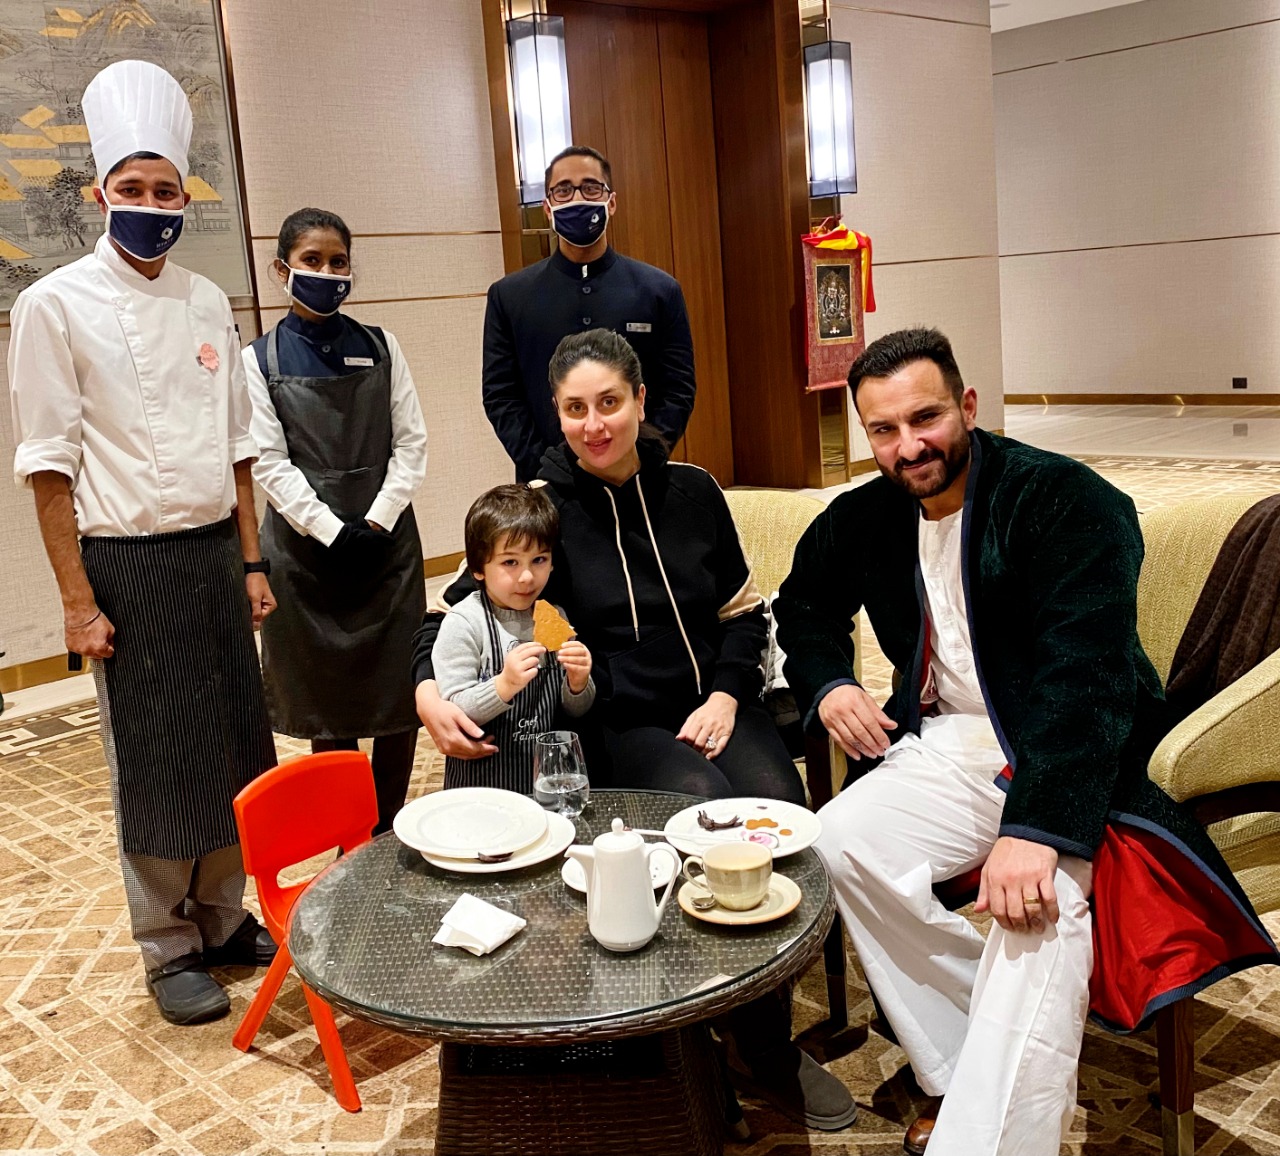 Check out Taimur Ali Khan’s customised meal